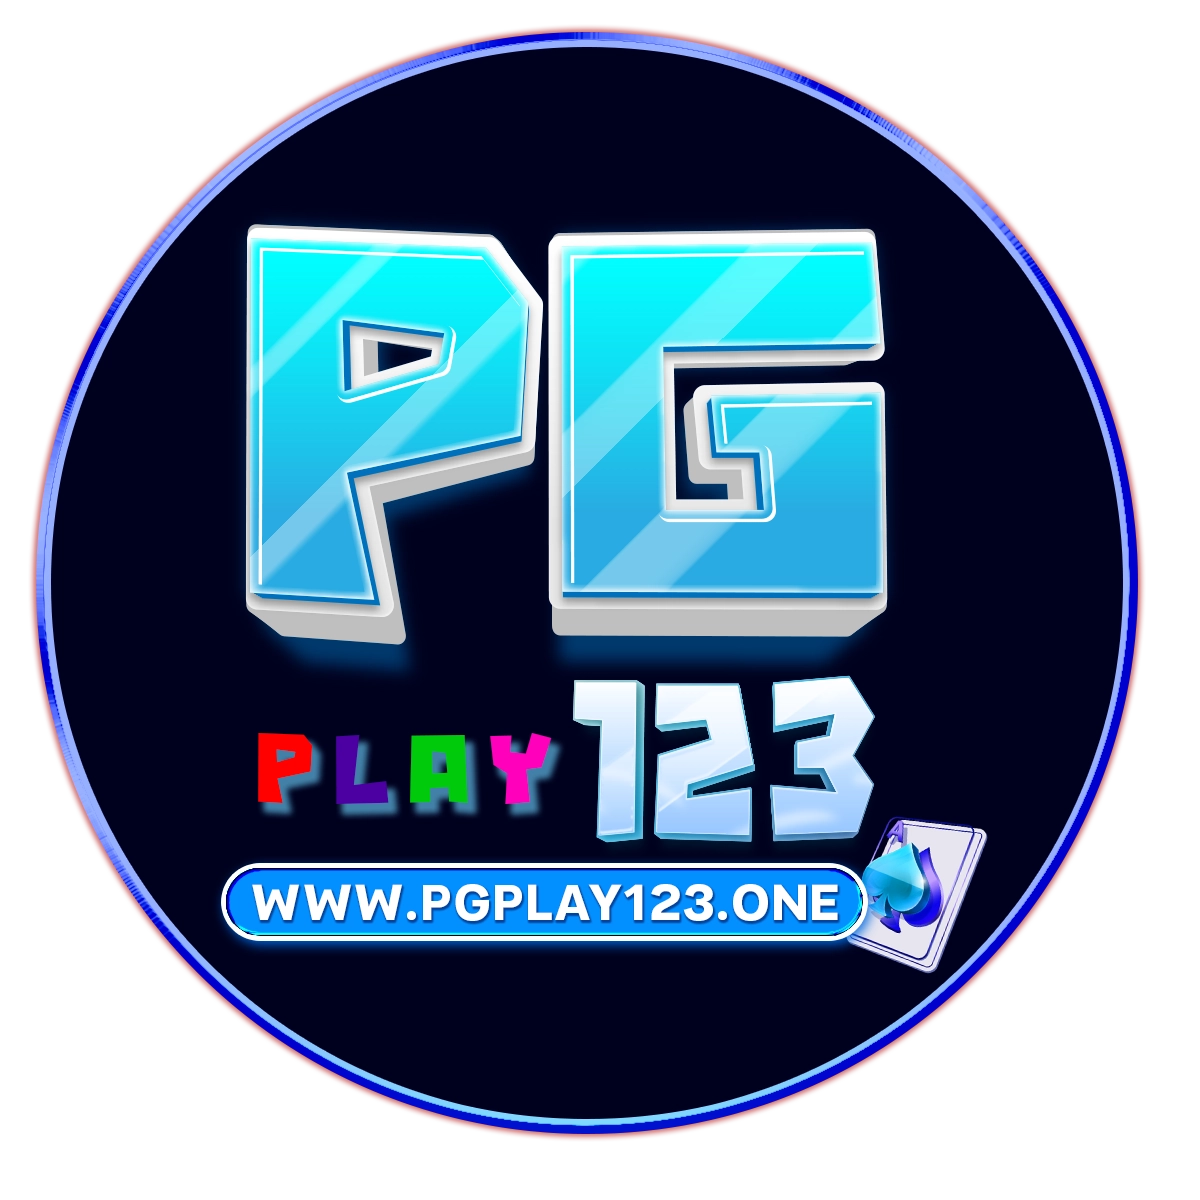 pgplay123